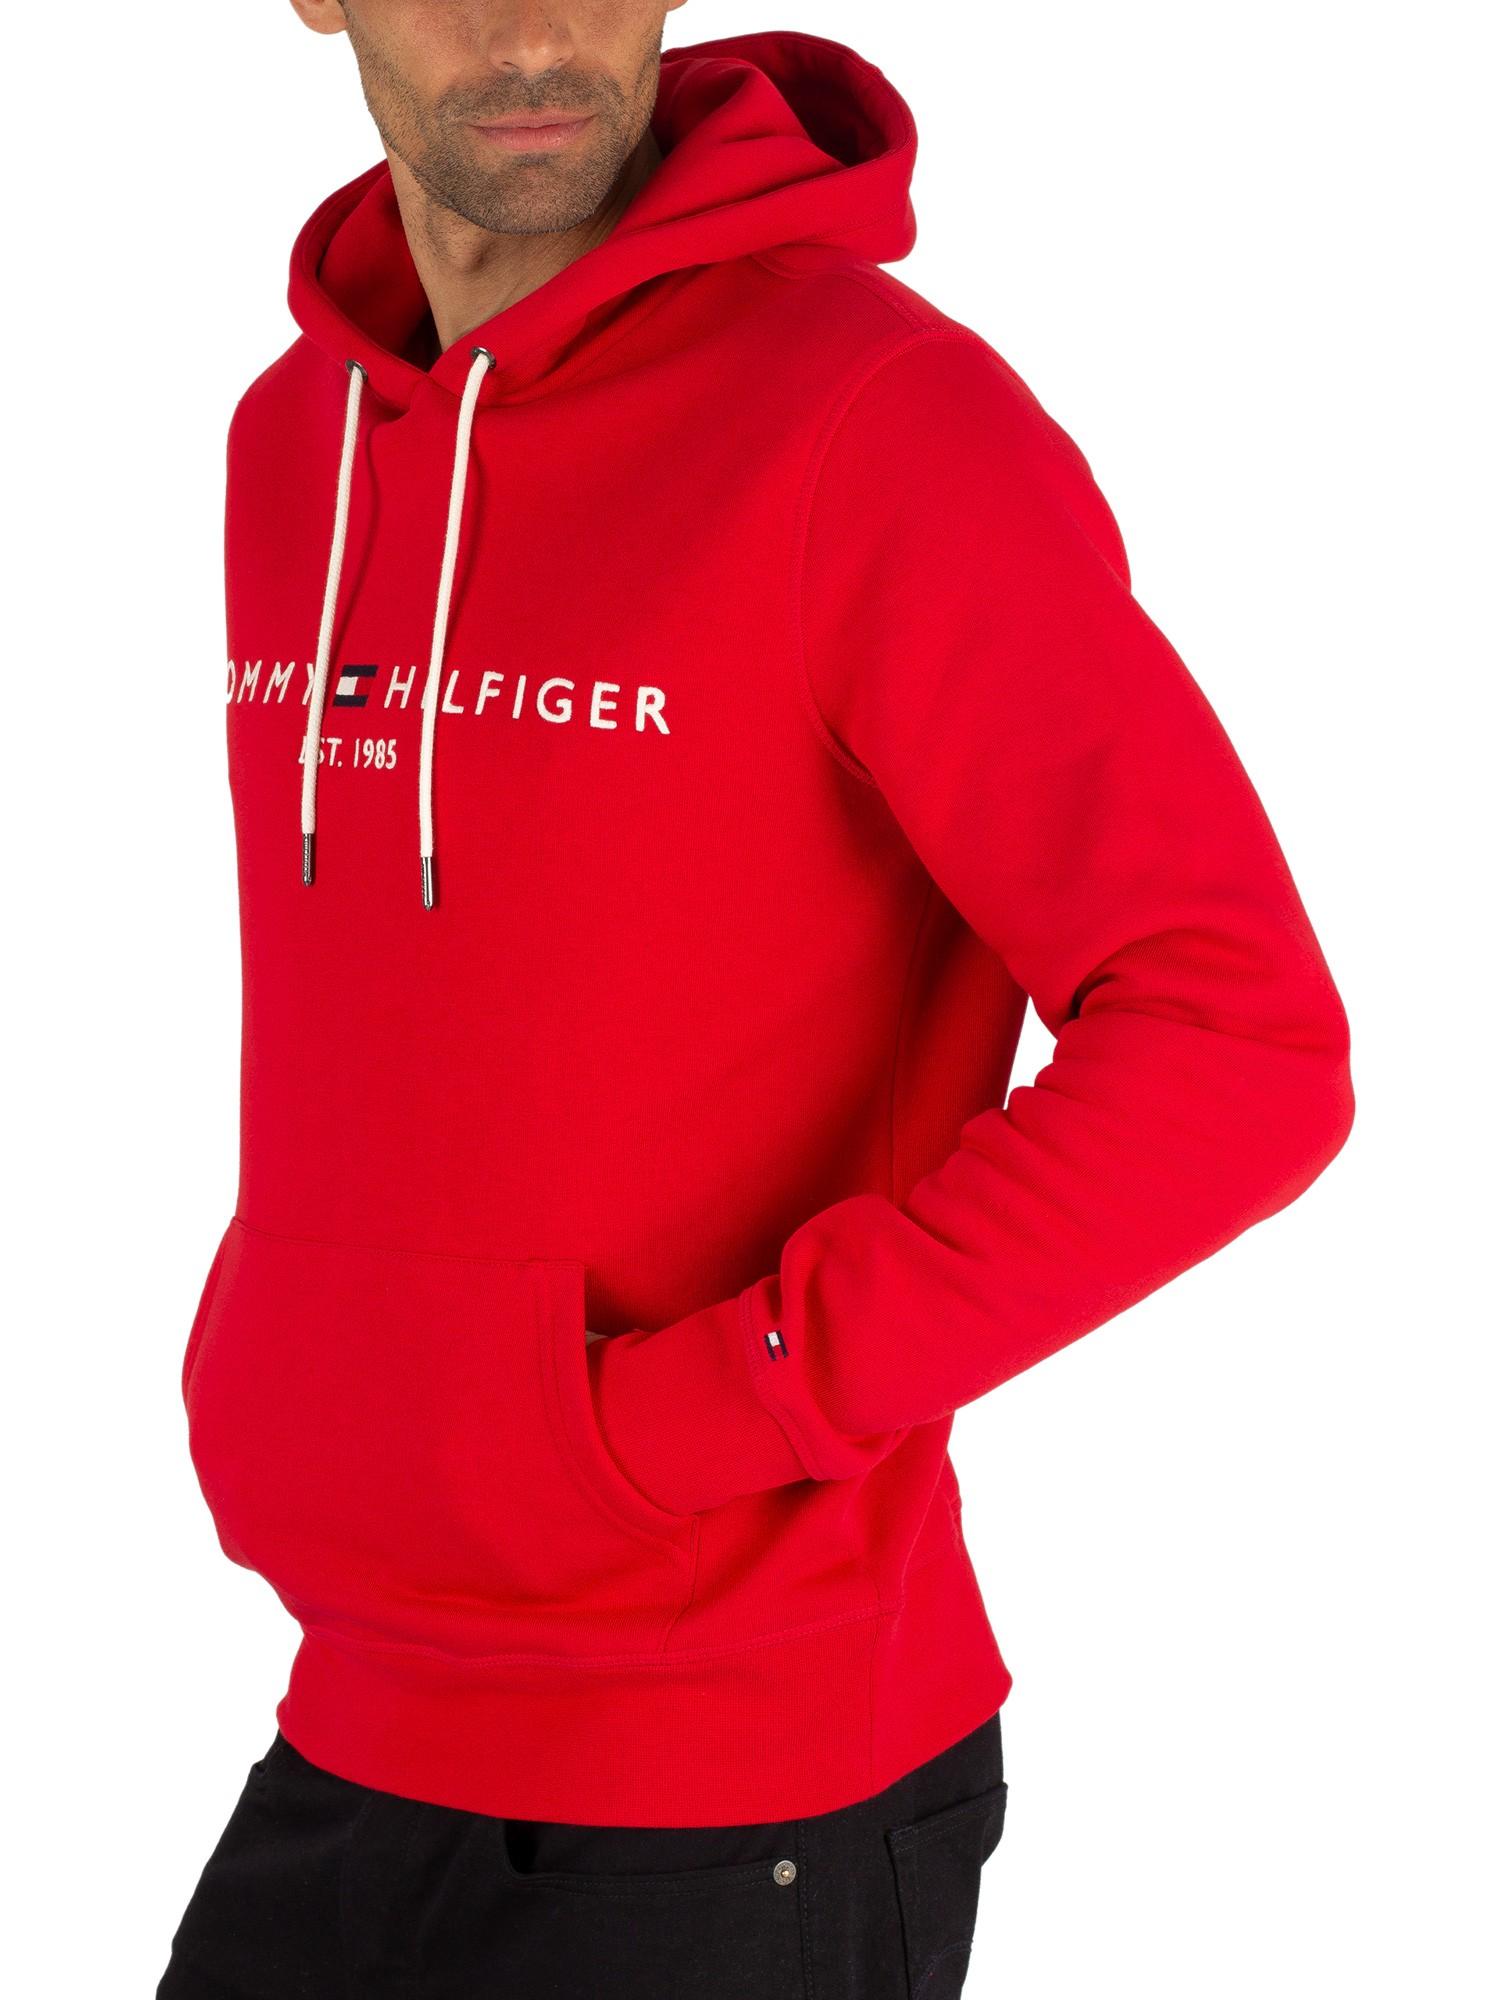 Tommy Hilfiger Cotton Logo Pullover Hoodie in Red for Men - Lyst